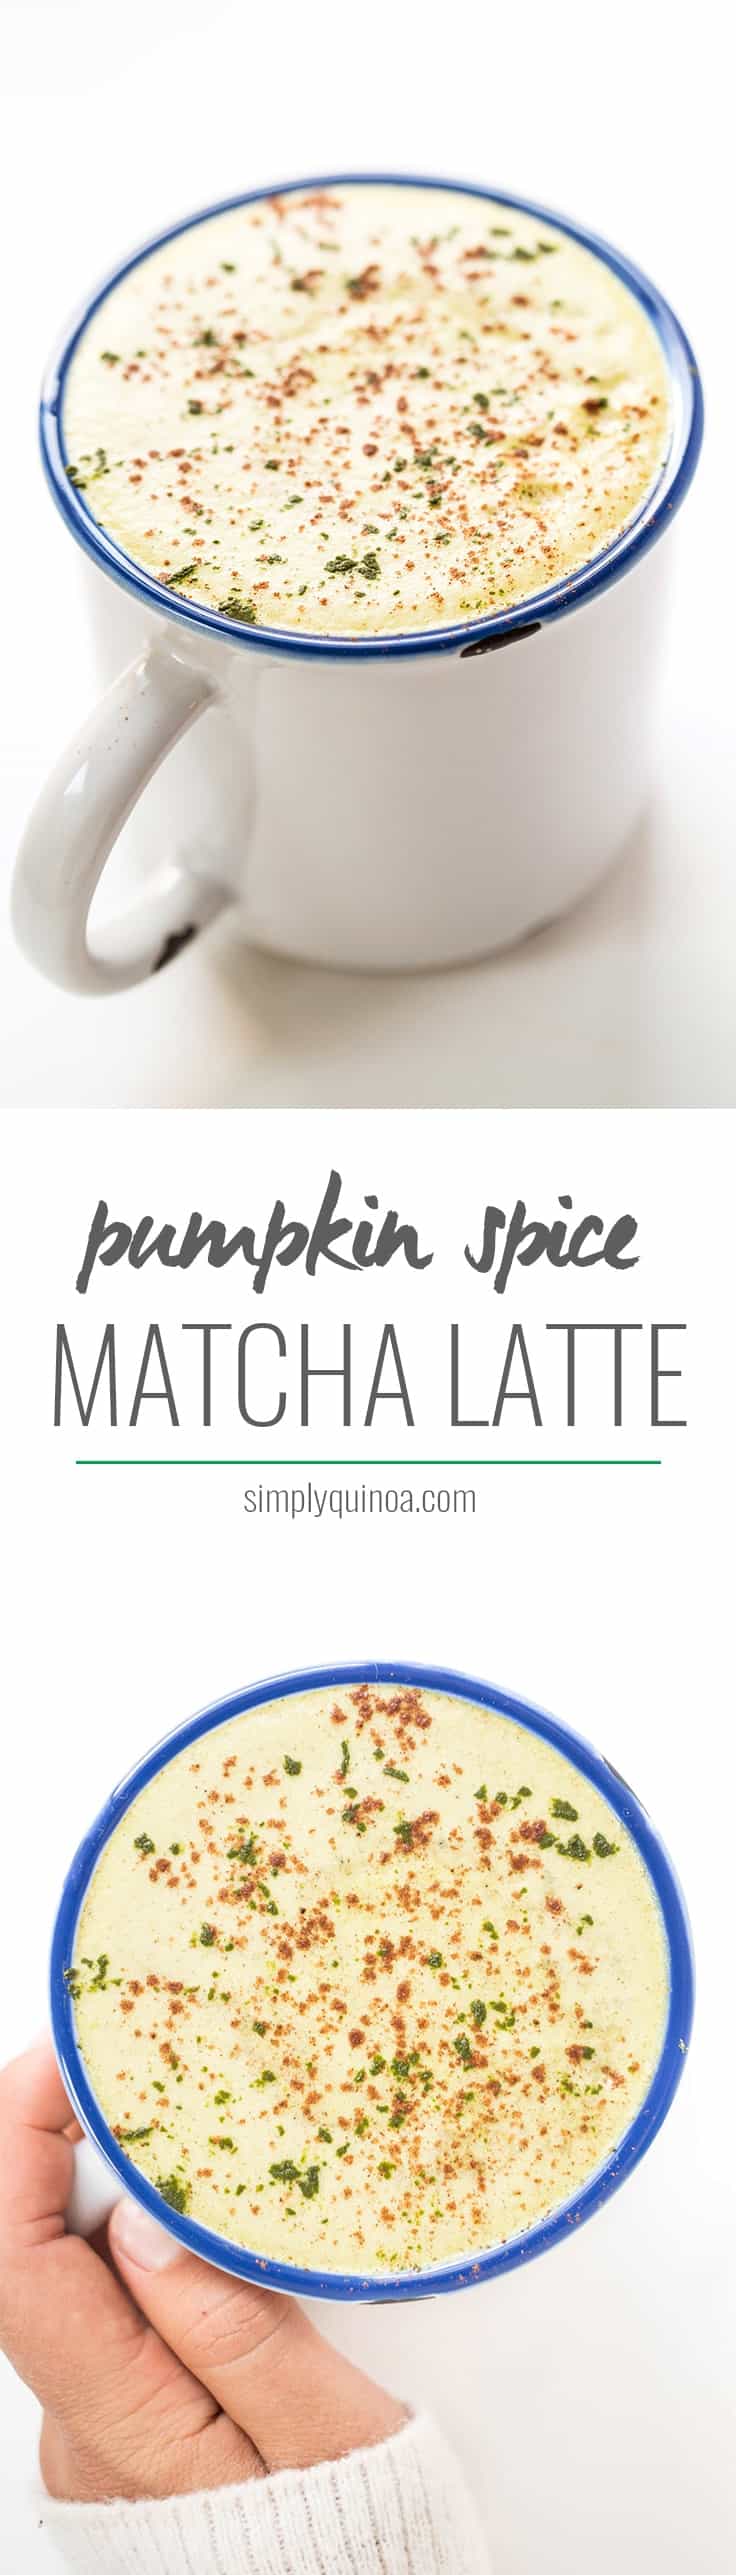 Pumpkin Spice Matcha Latte - a perfect alternative to the not-so-healthy pumpkin spice lattes!